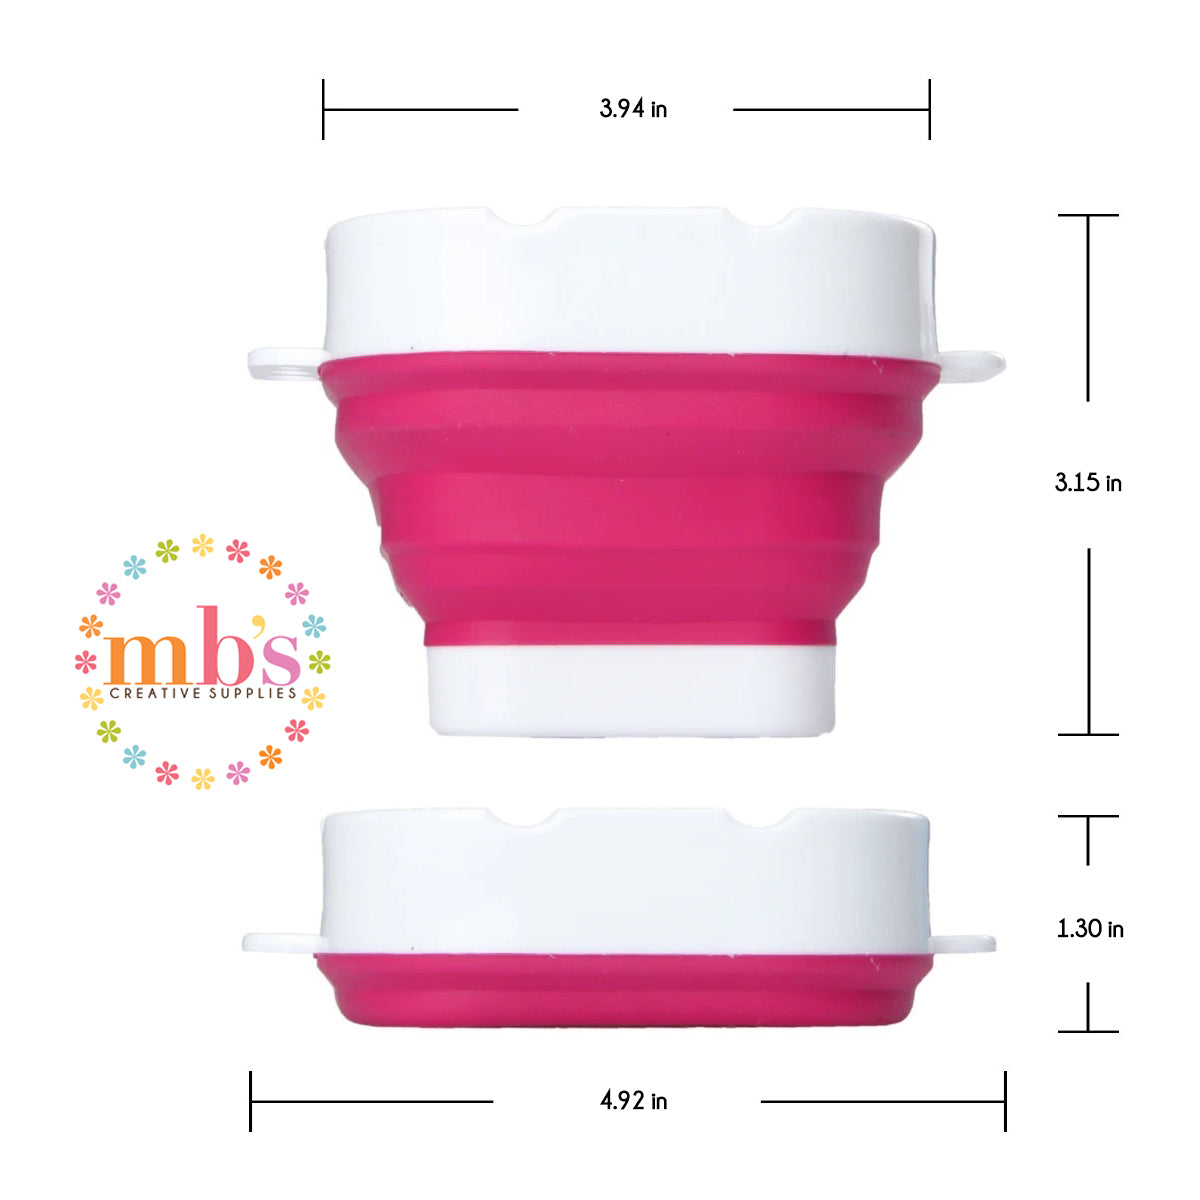 Square Collapsible Water Rinse Cups - 2 Bright Colors